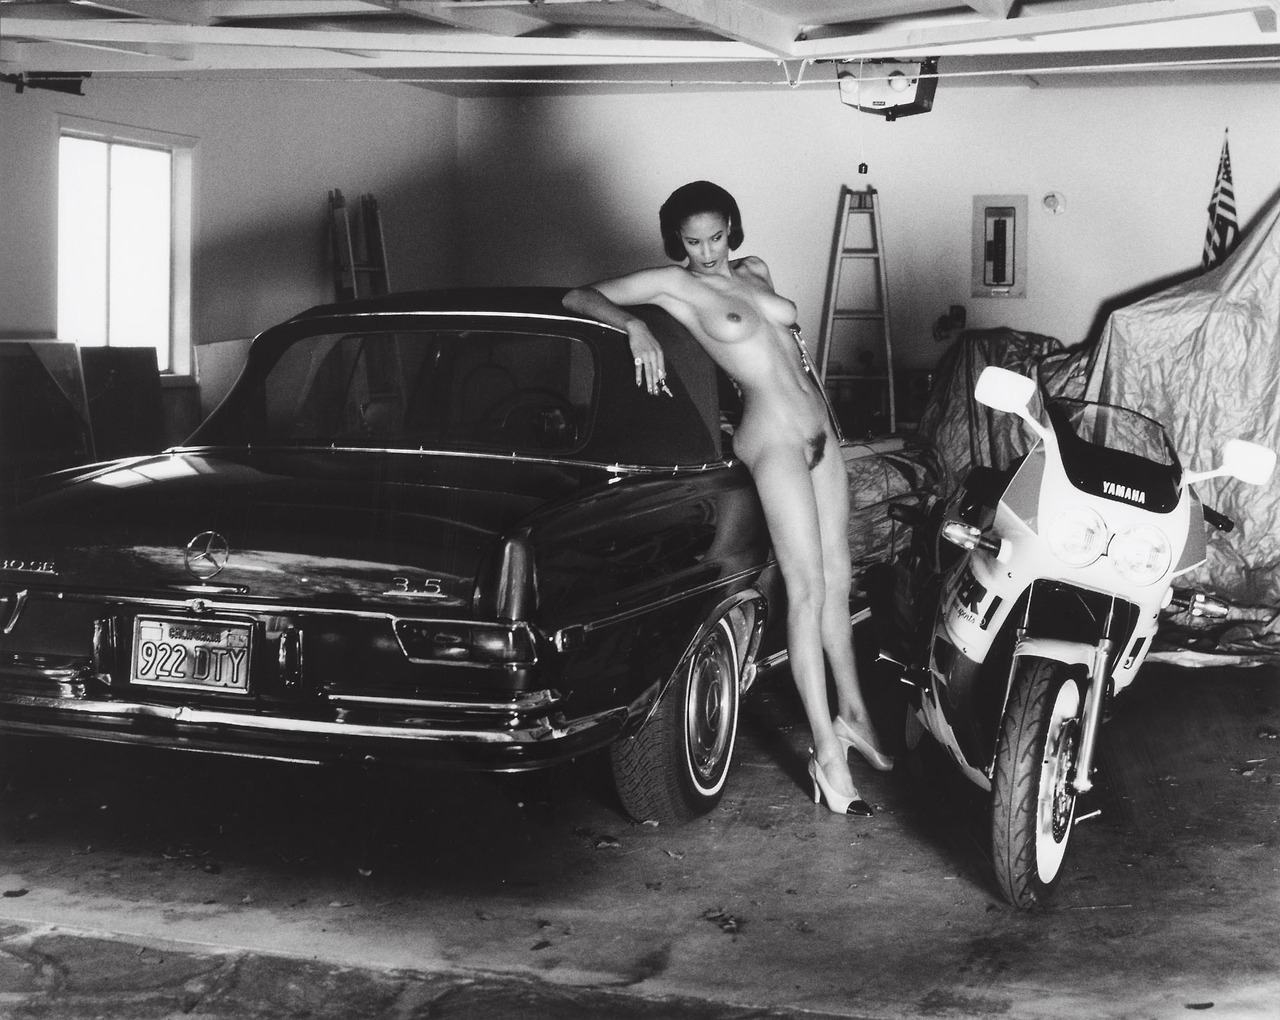 middleamerica: Untitled (Helmut’s Angels for Playboy), 1988, Helmut Newton See